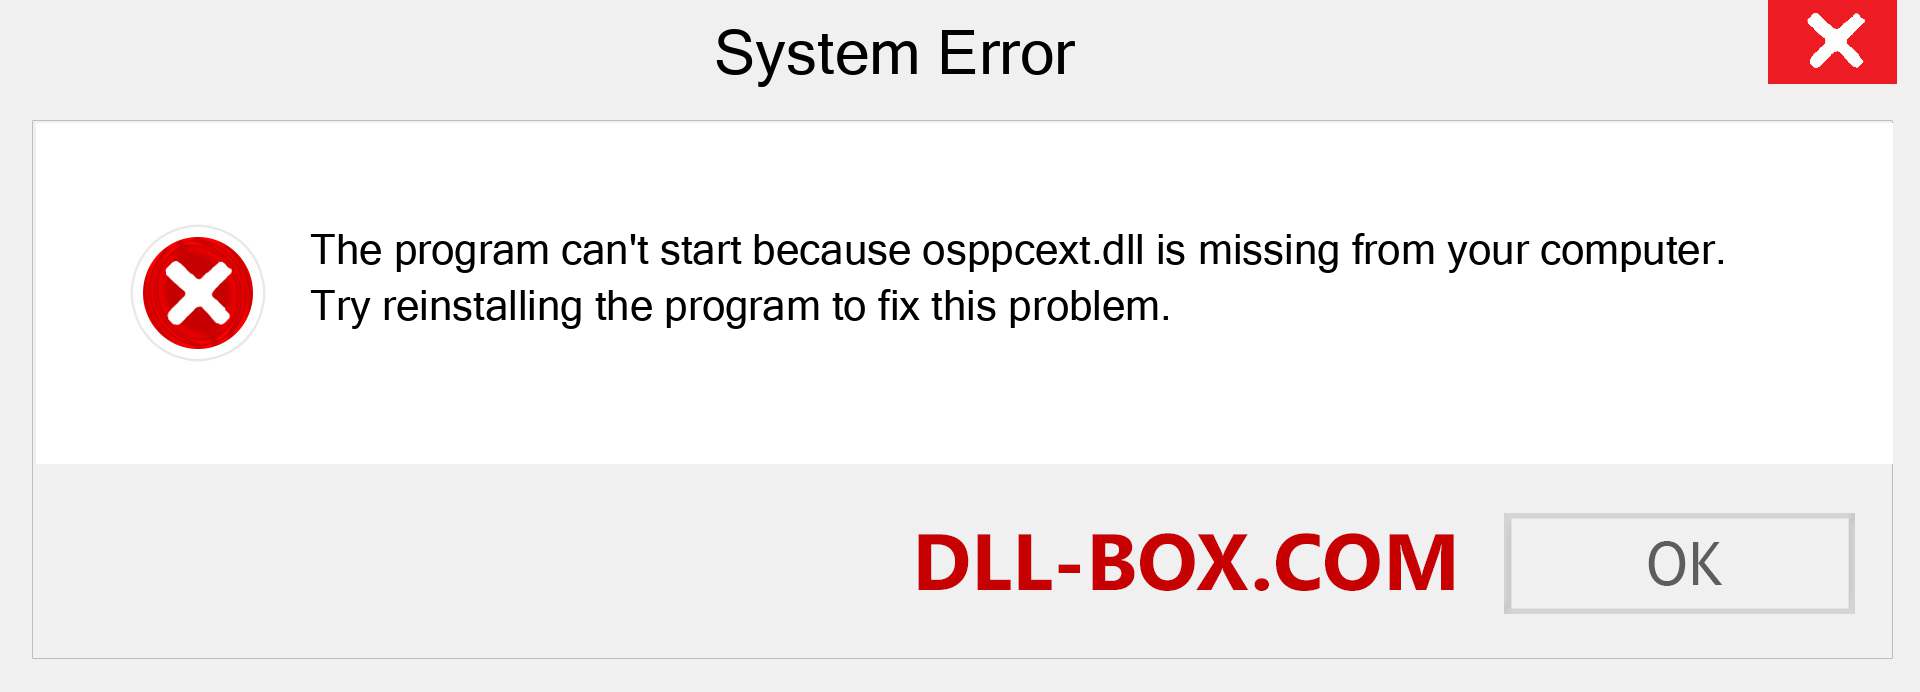  osppcext.dll file is missing?. Download for Windows 7, 8, 10 - Fix  osppcext dll Missing Error on Windows, photos, images